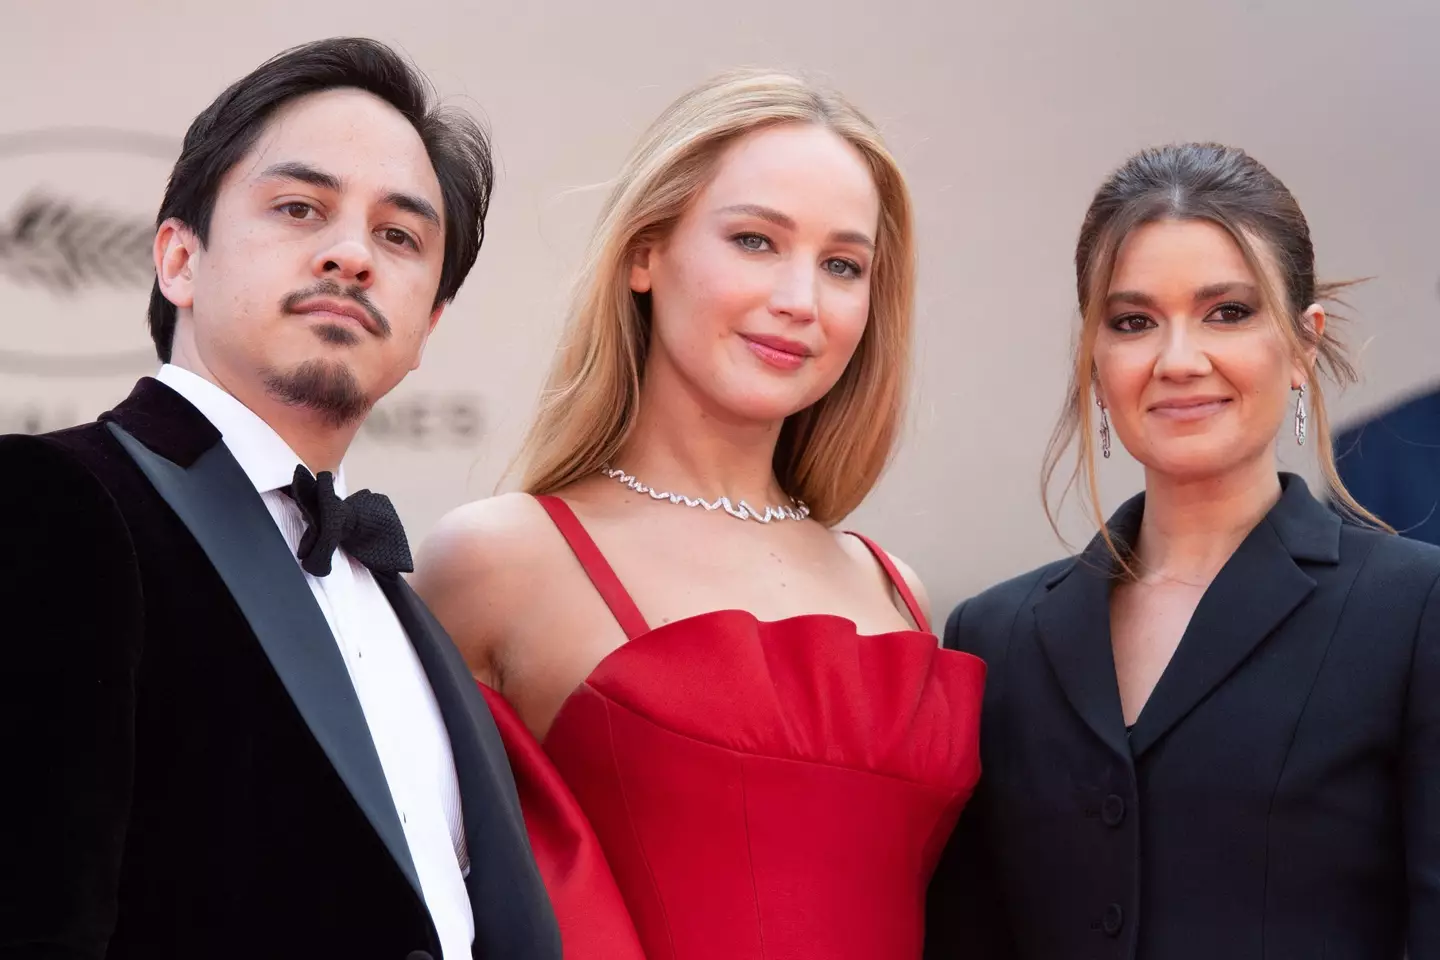 Jennifer Lawrence and Justine Ciarrocchi attending the Anatomie d'une Chute Premiere as part of the 76th Cannes Film Festival in Cannes.